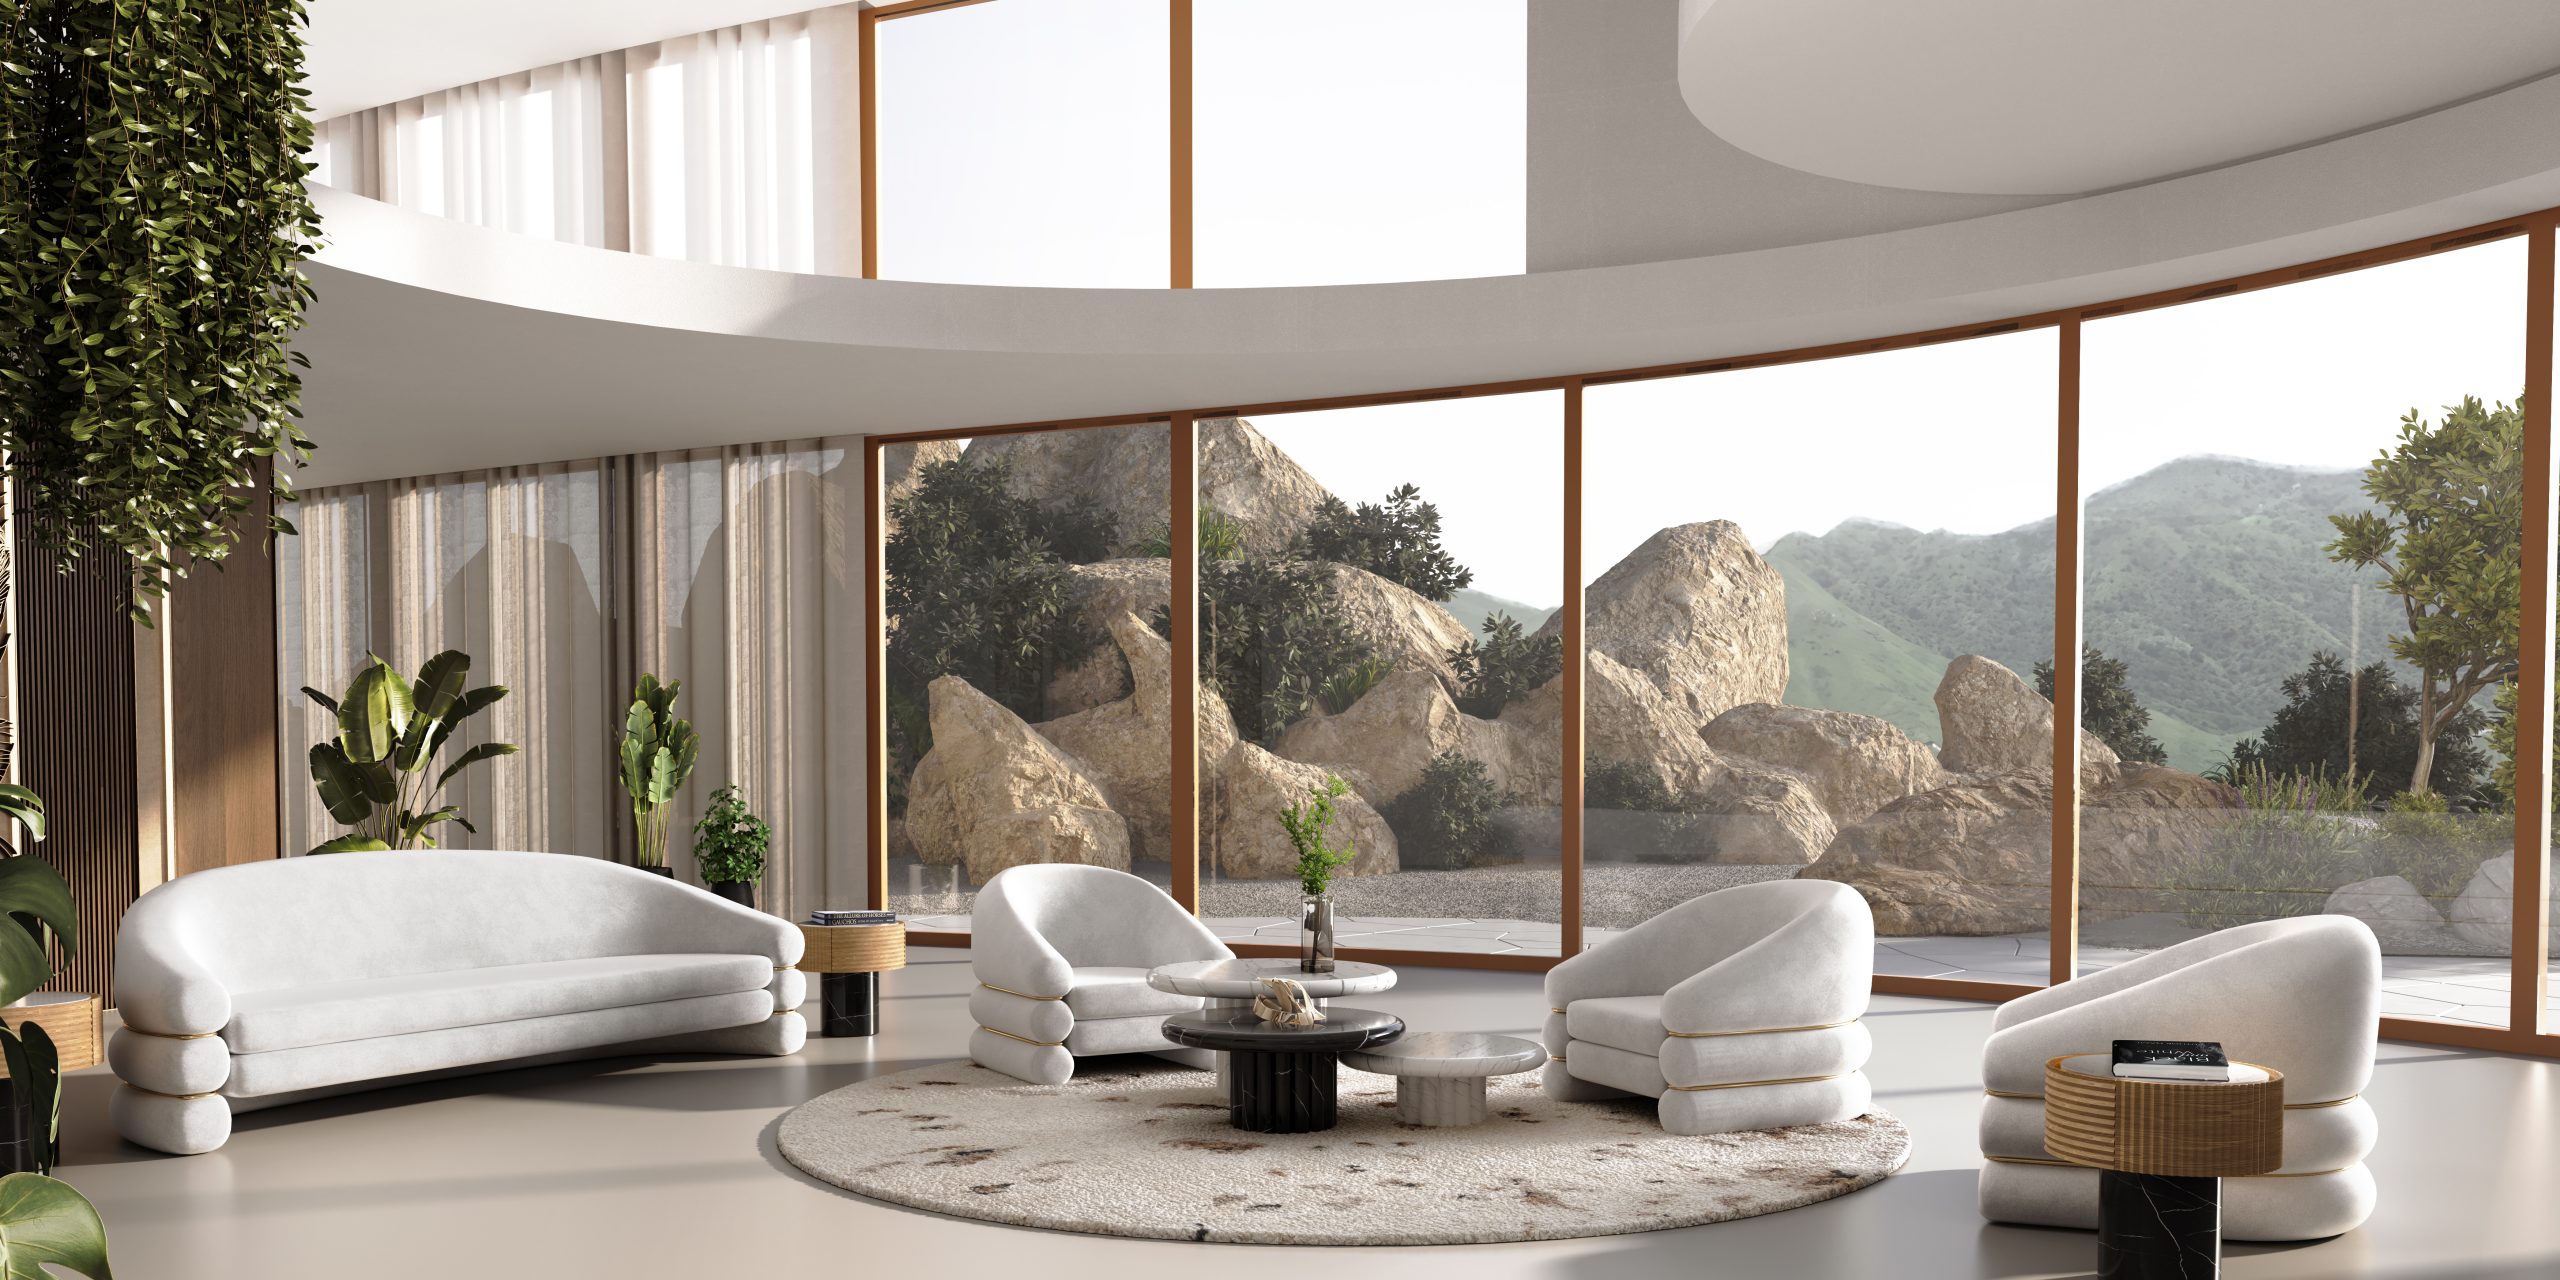 LUXURY MODERN LIVING ROOM WITH NATURE ACCENTS